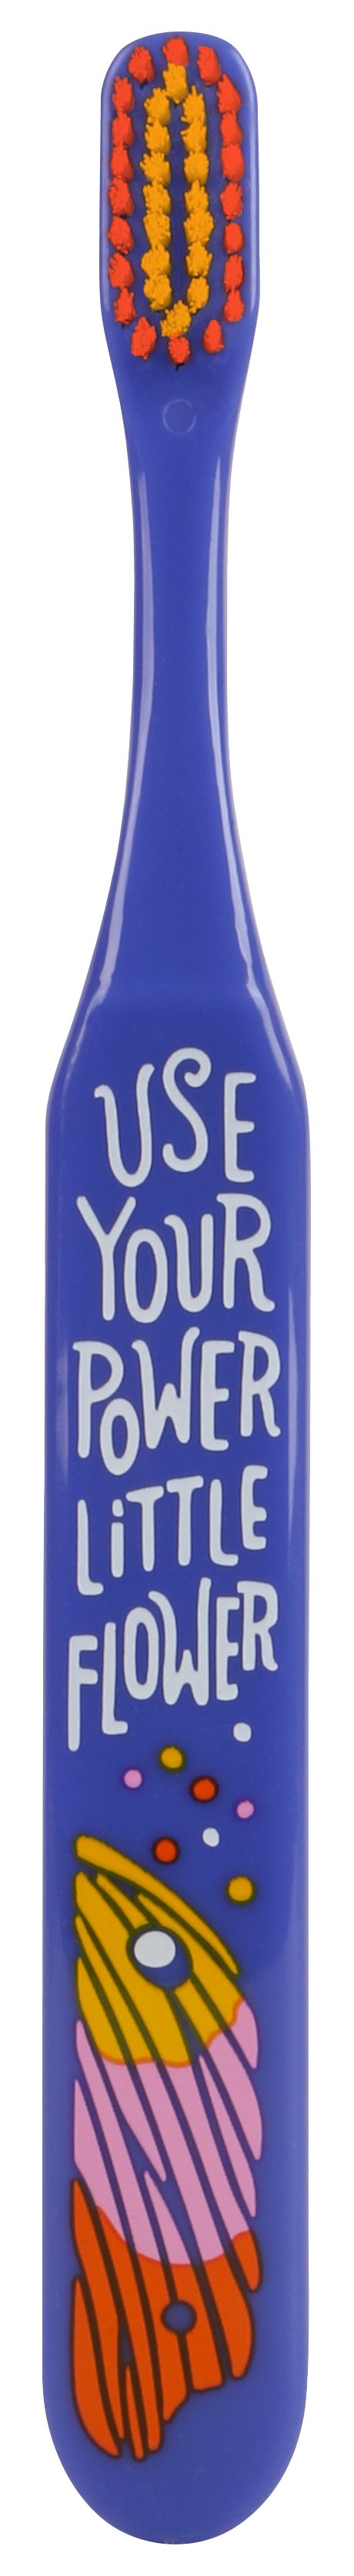 Use Your Power Little Flower Toothbrush | Soft BPA-Free Funny Toothbrush Packaged for Gifting | Art on Both Sides